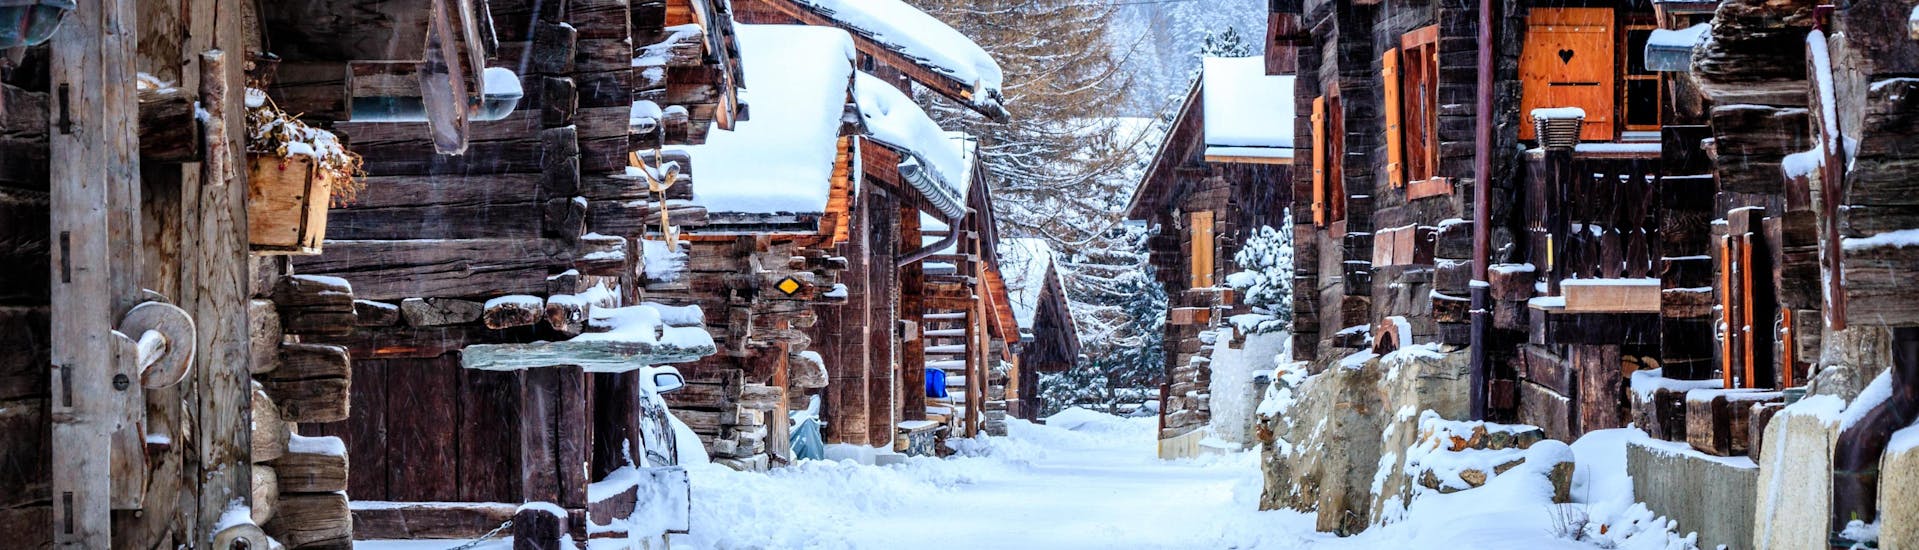 An image of the wooden chalets in the small Swiss ski resort of Grimnetz-Zinal, a popular destination for skiers who want to book ski lessons with one of the local ski schools.